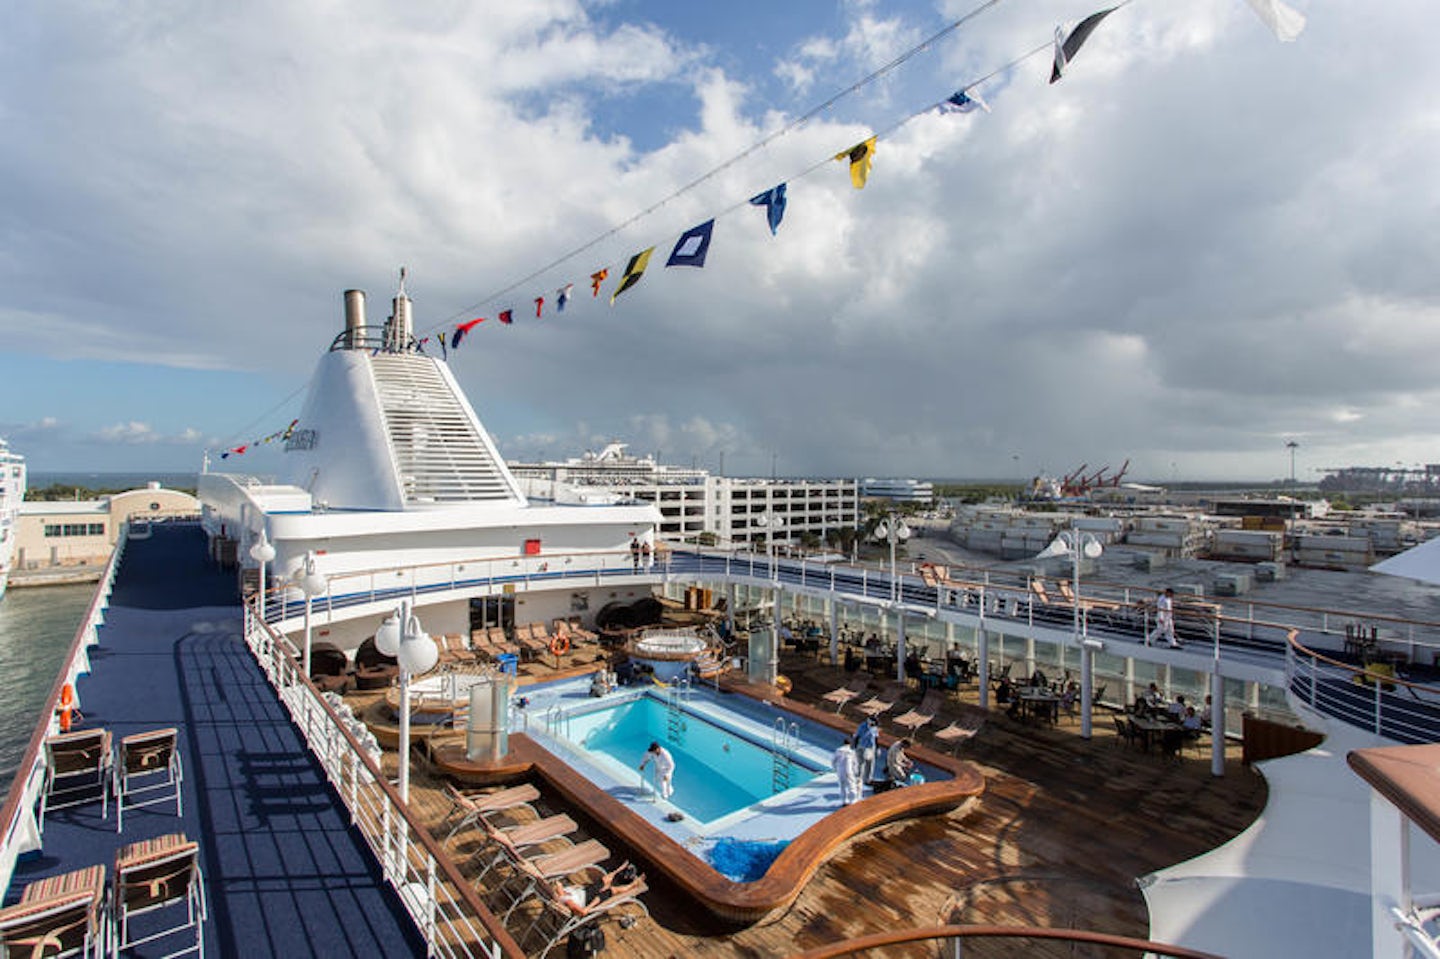 The Pool on Silver Whisper